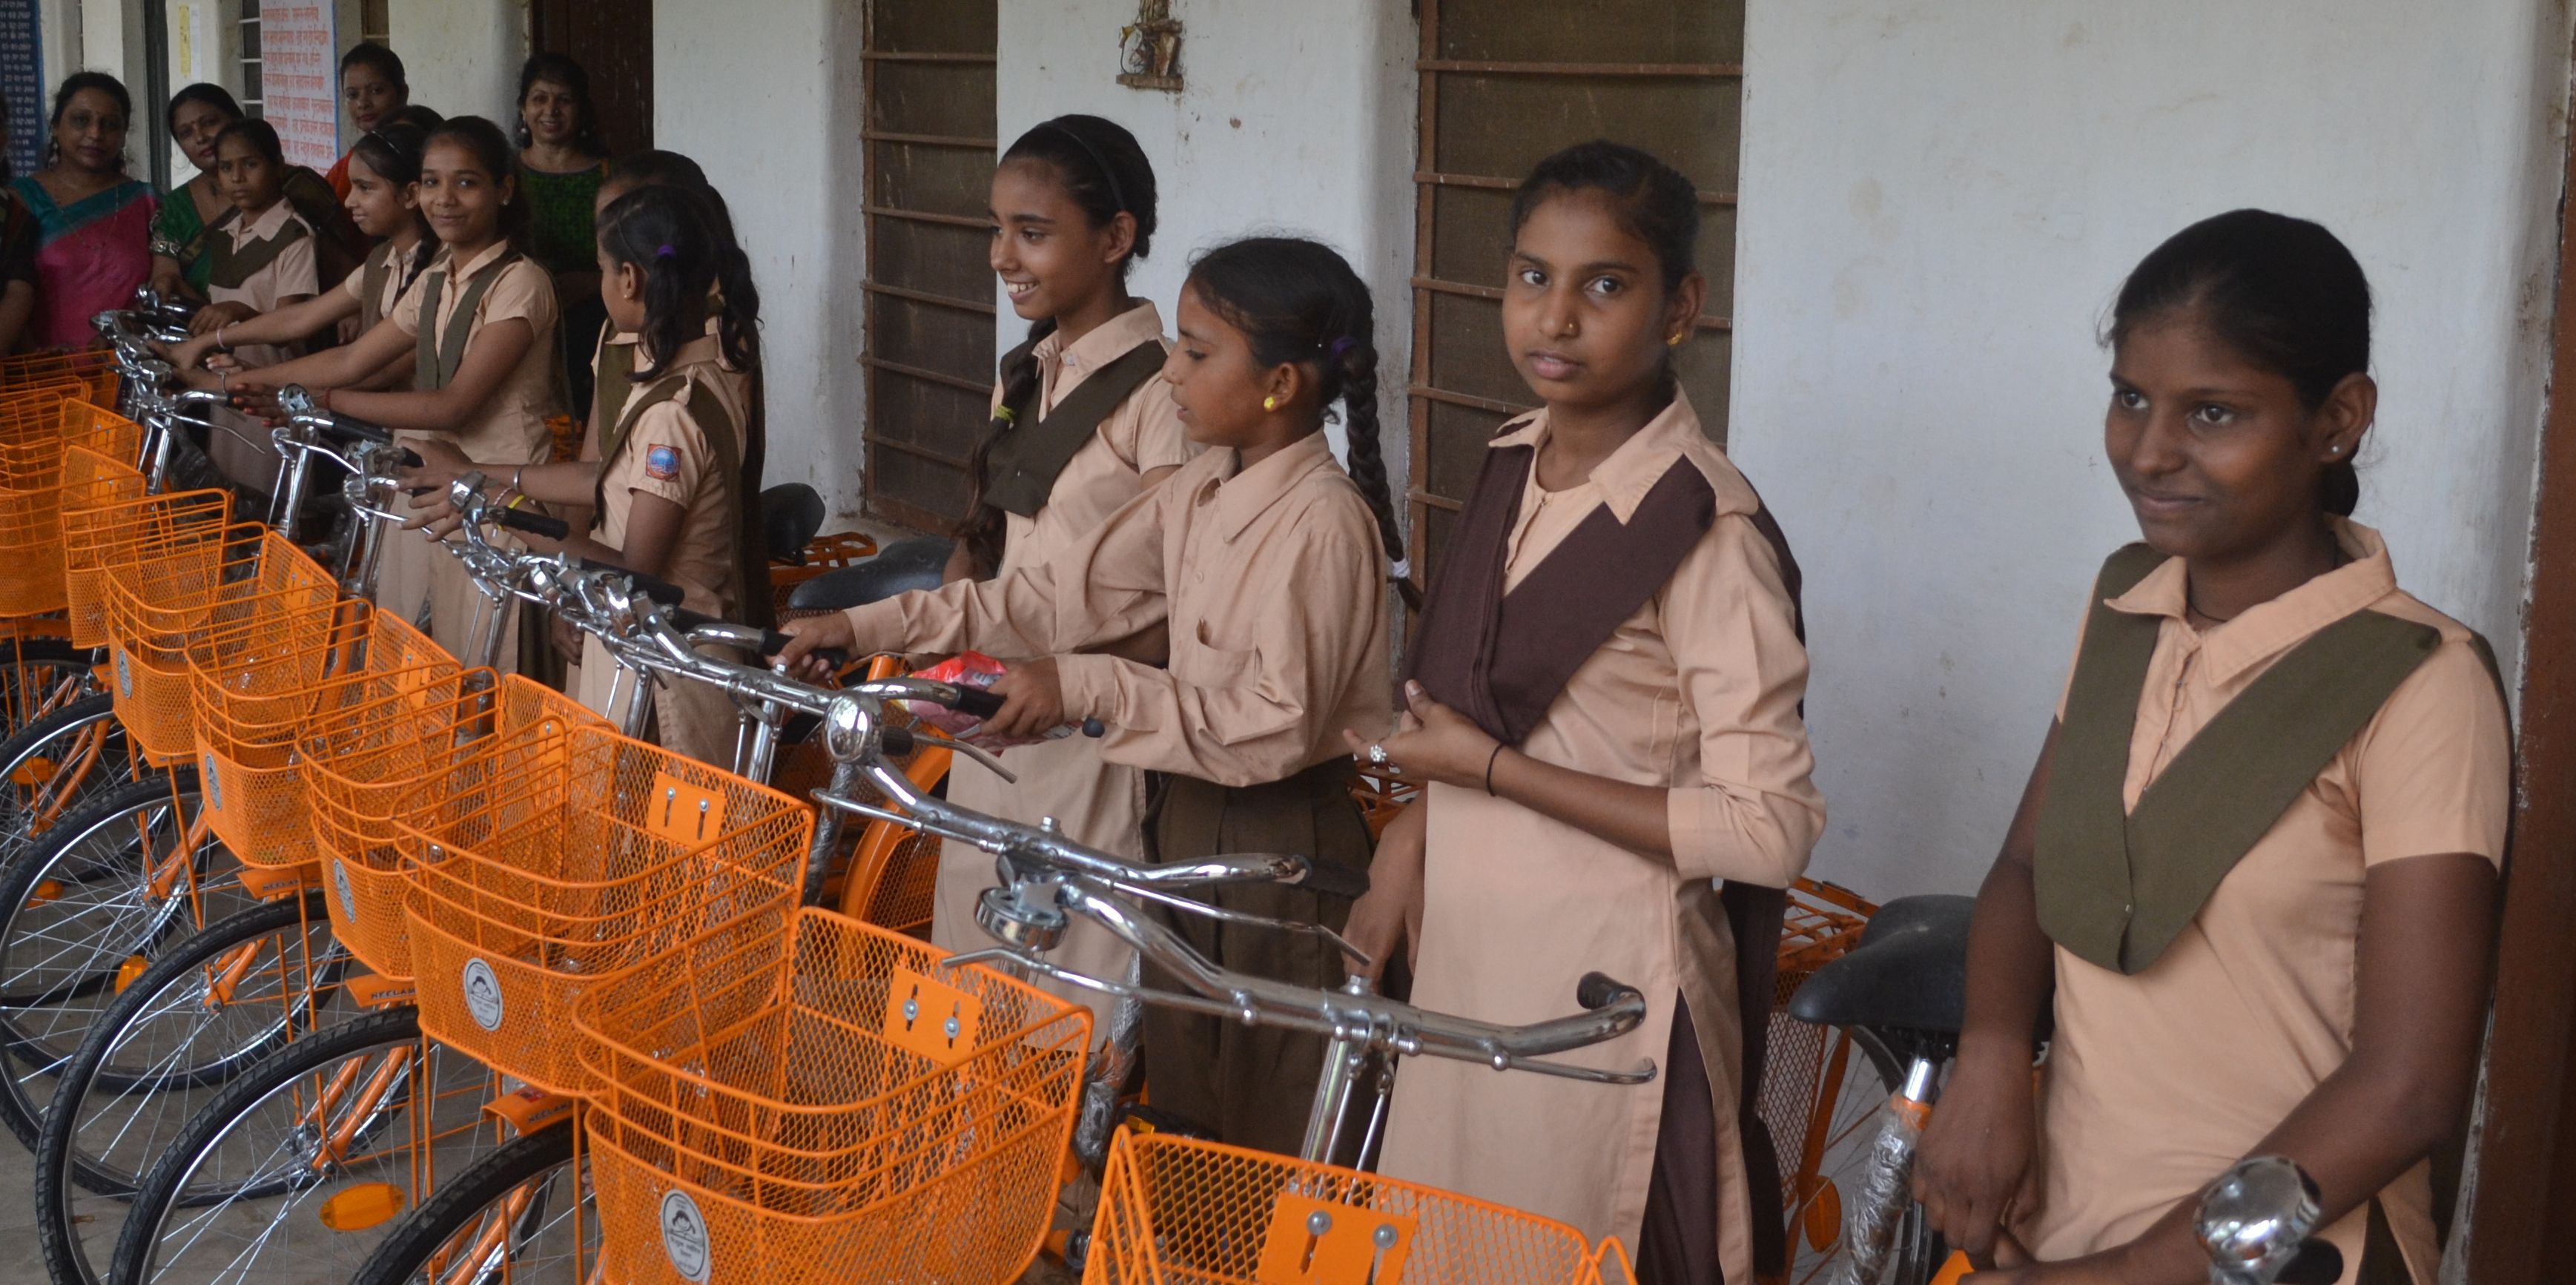 Alwar District Education Department has distributed bicycles